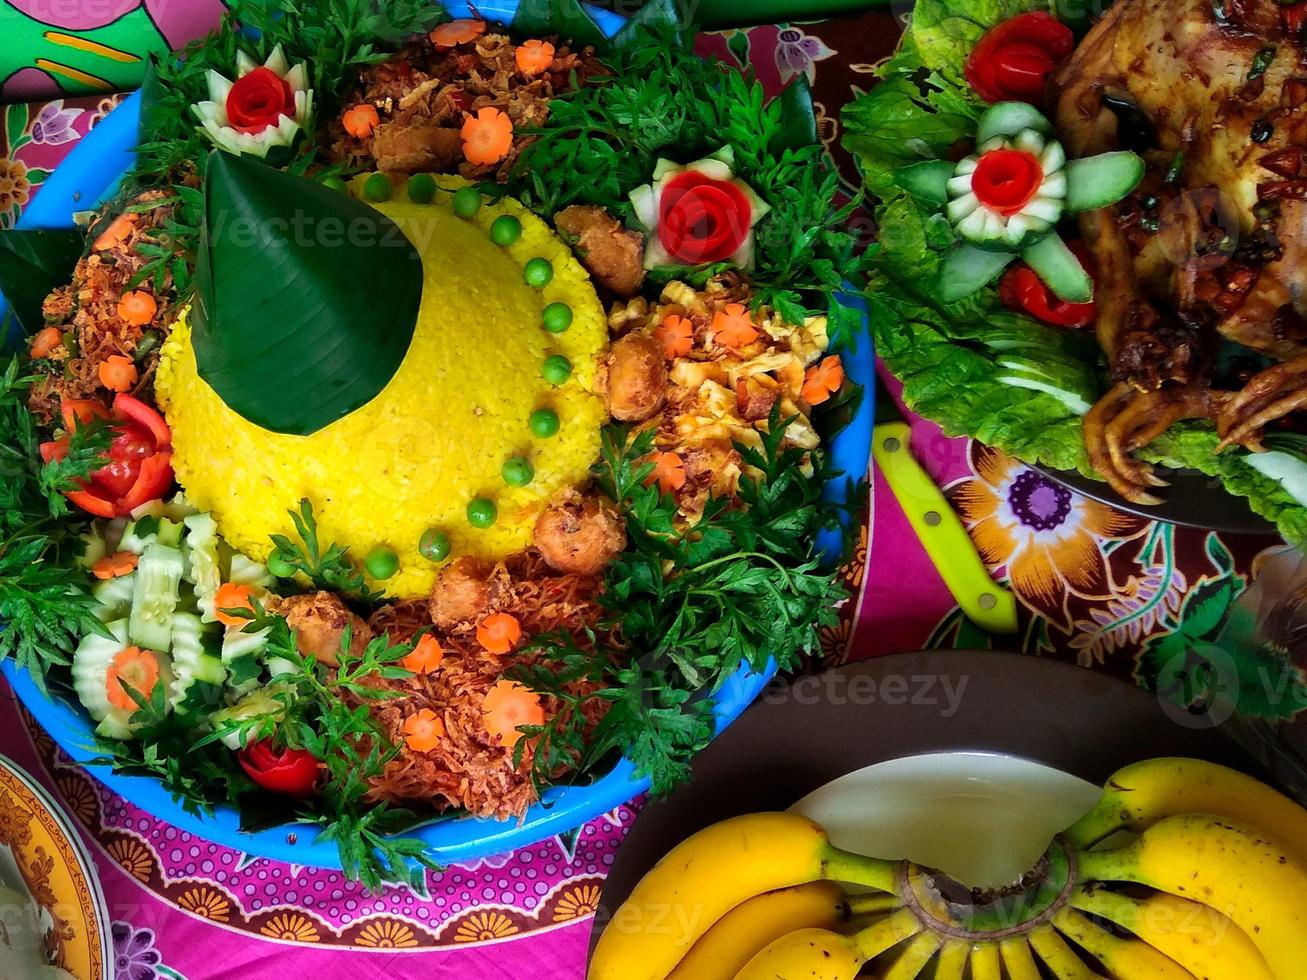 typical Indonesian tumpeng food, yellow rice with other complements photo